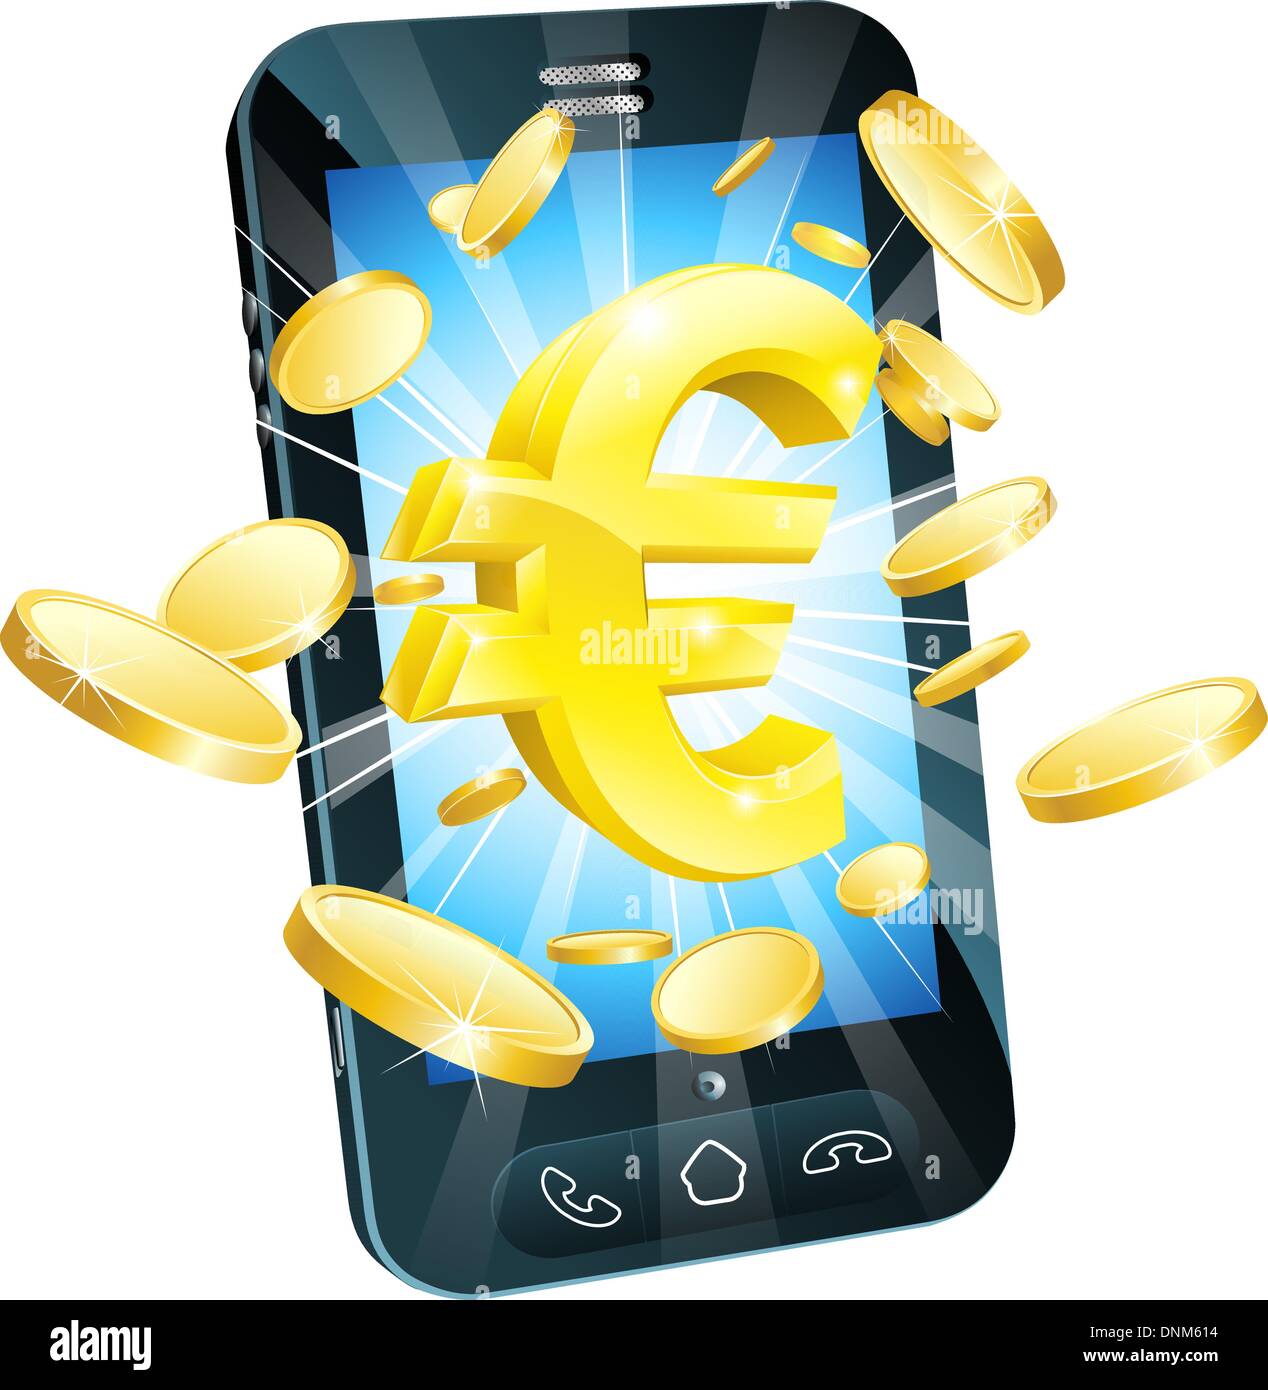 Euro money phone concept illustration of mobile cell phone with gold Euro sign and coins Stock Vector